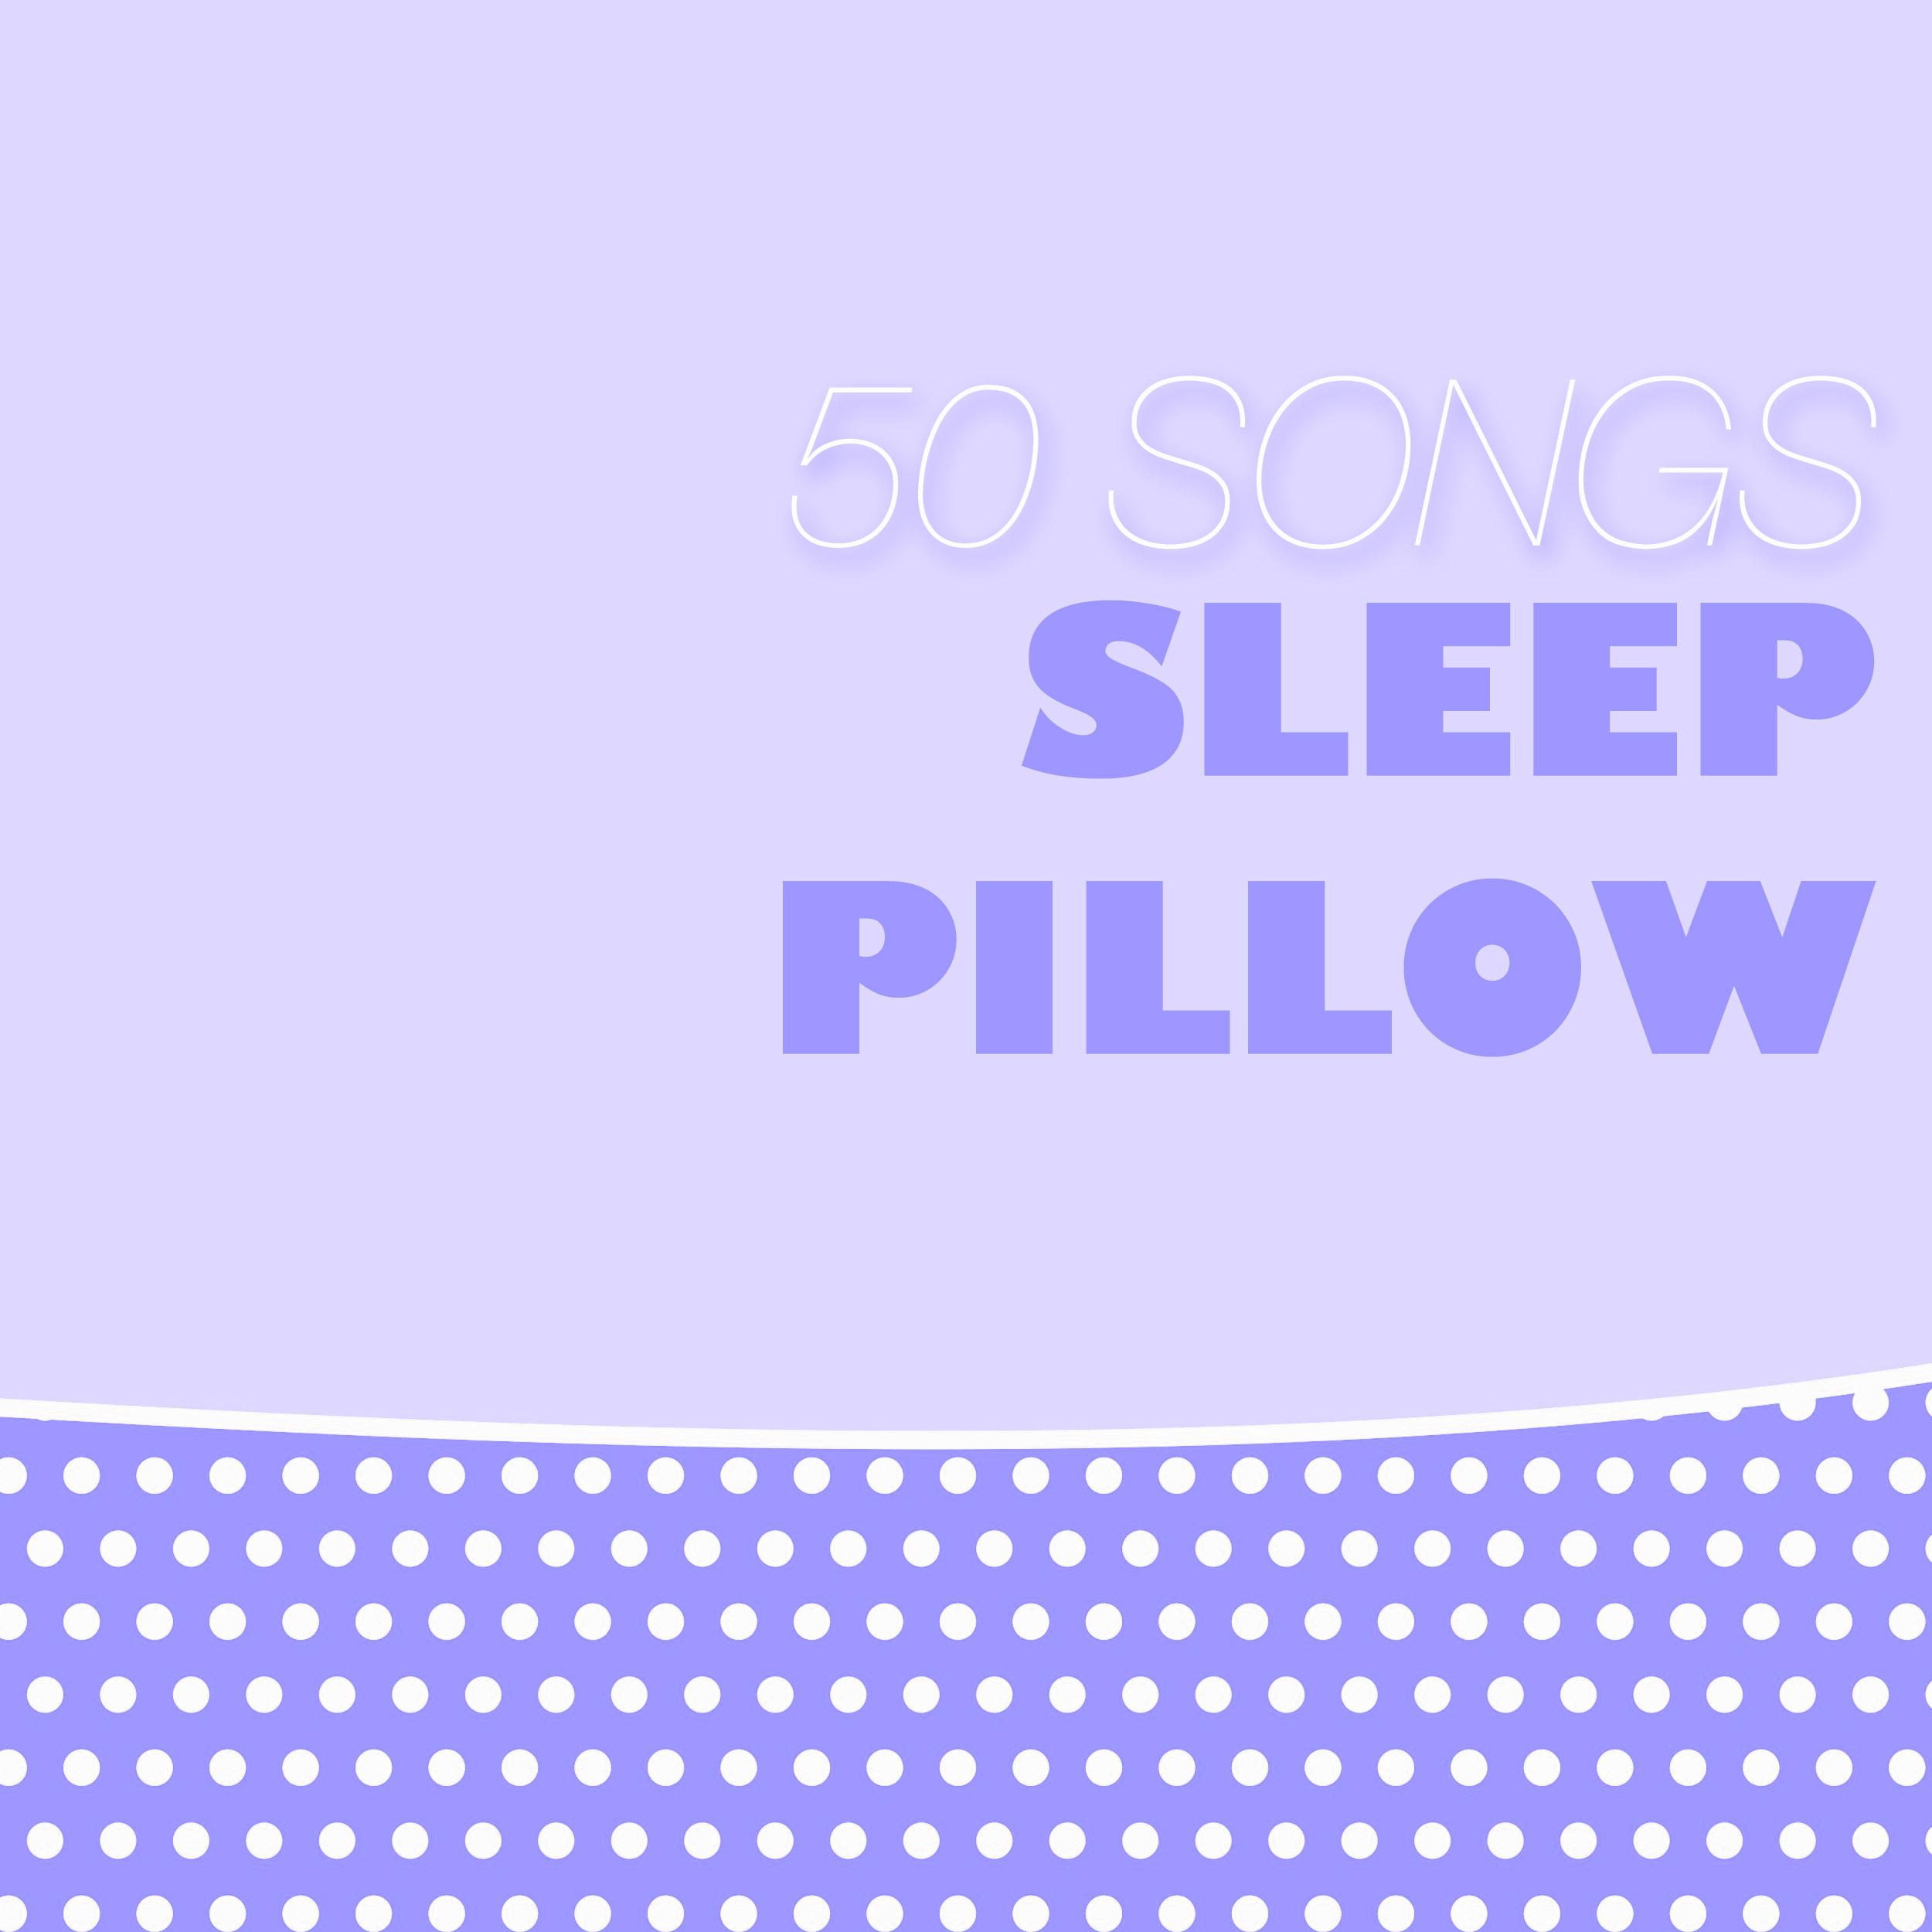 Sleep Pillow - 50 Songs for REM Deep Sleep Inducing, Preparation to Relax Before Bedtime